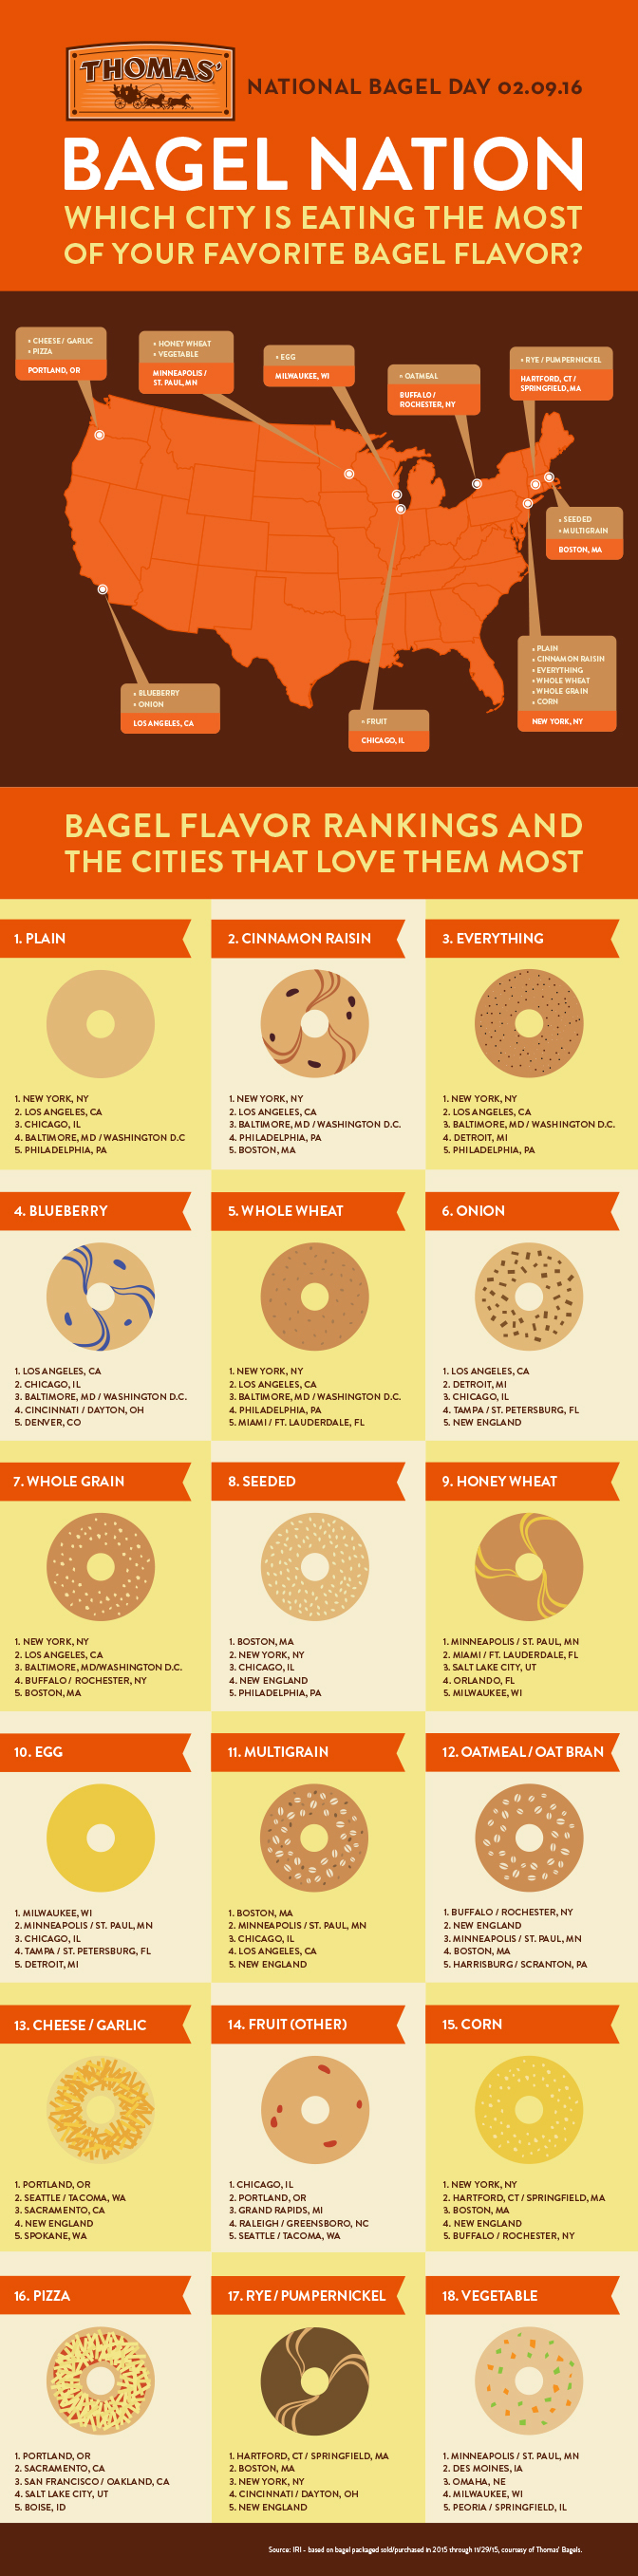 Bagel-Nation-Infographic100-020616